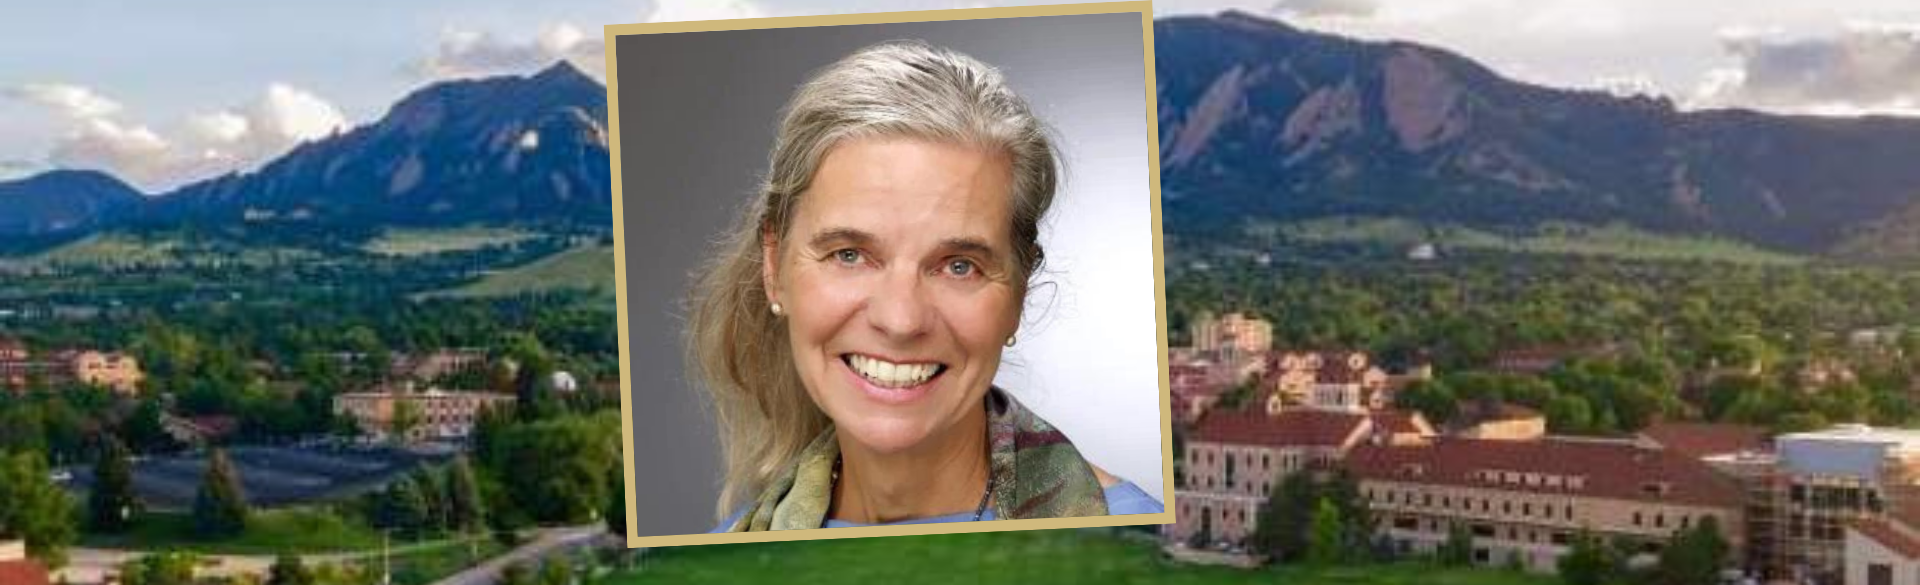 Karolin Luger, PhD, Honored By World Laureates Association | University of Colorado Cancer Center